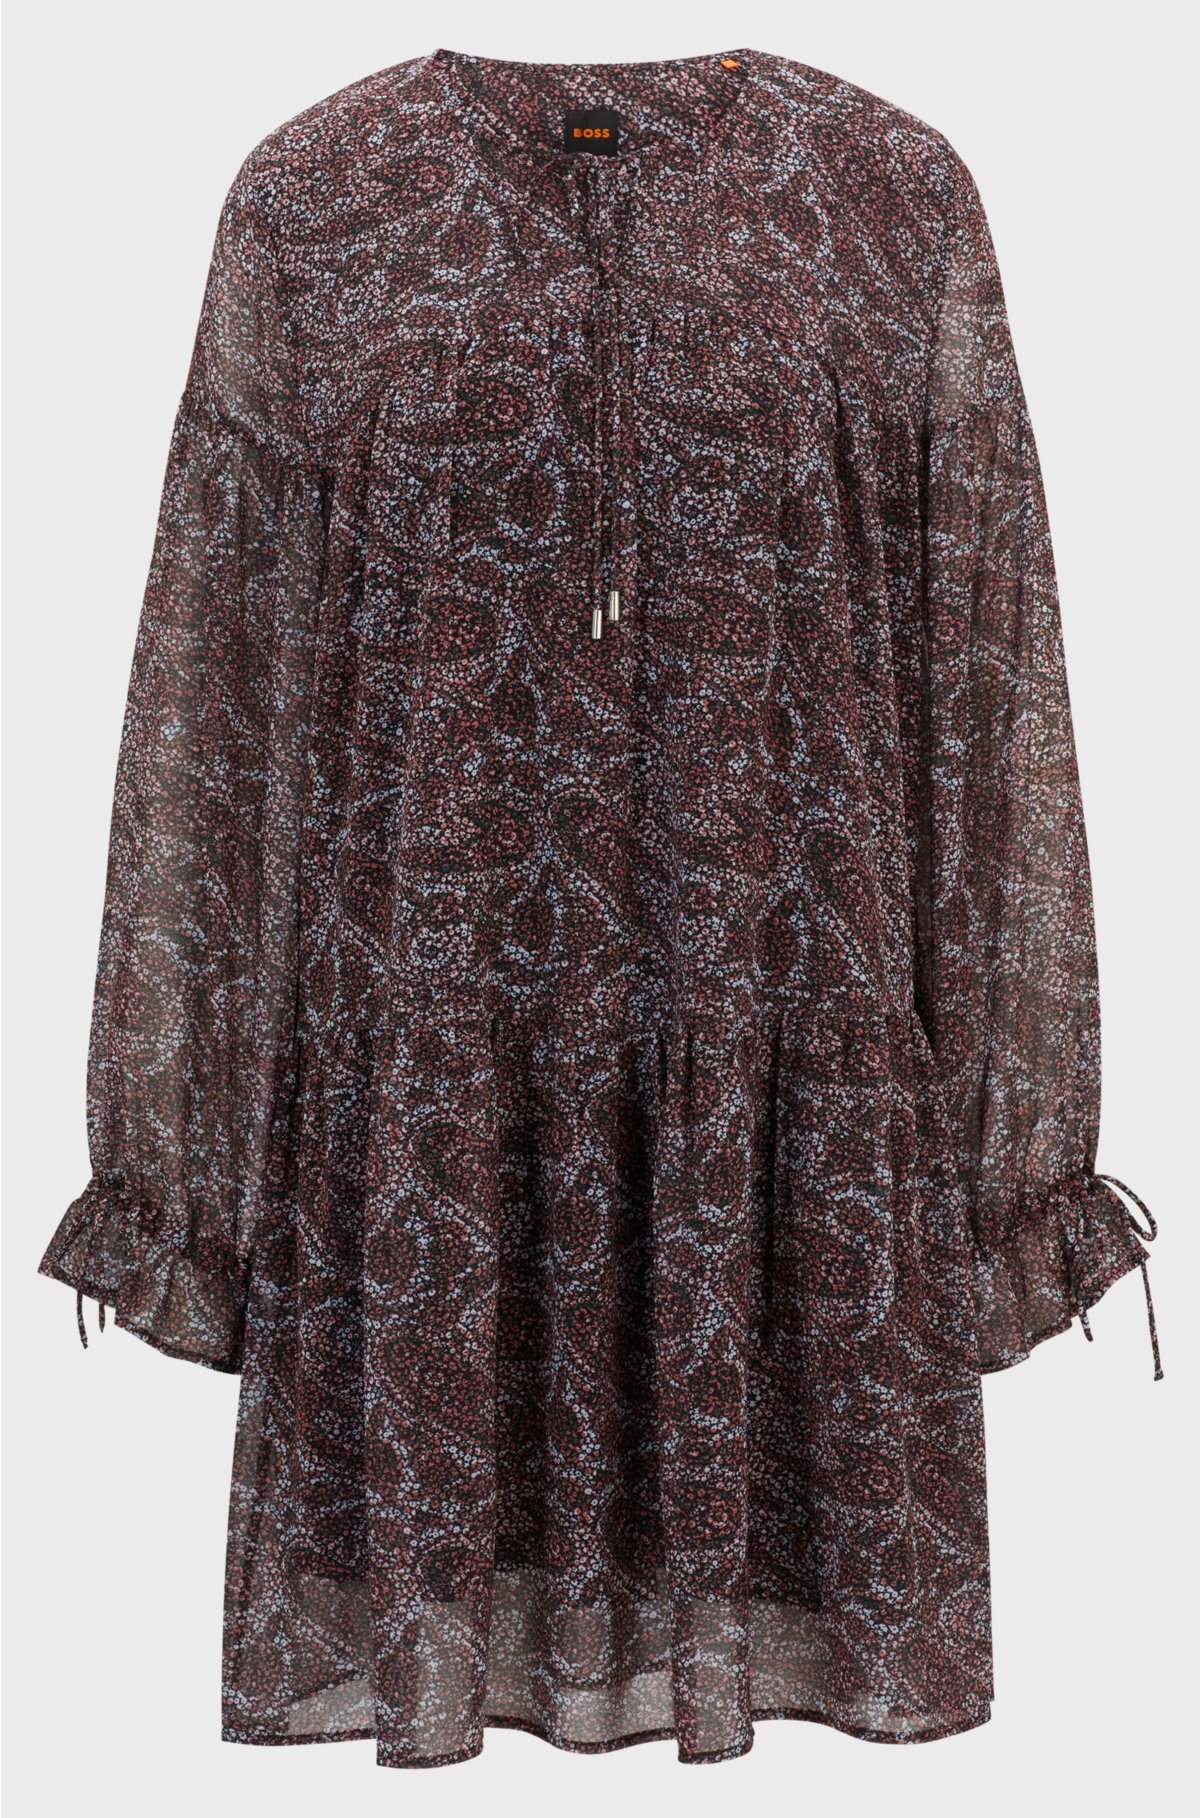 Paisley-print dress with tie details, Patterned